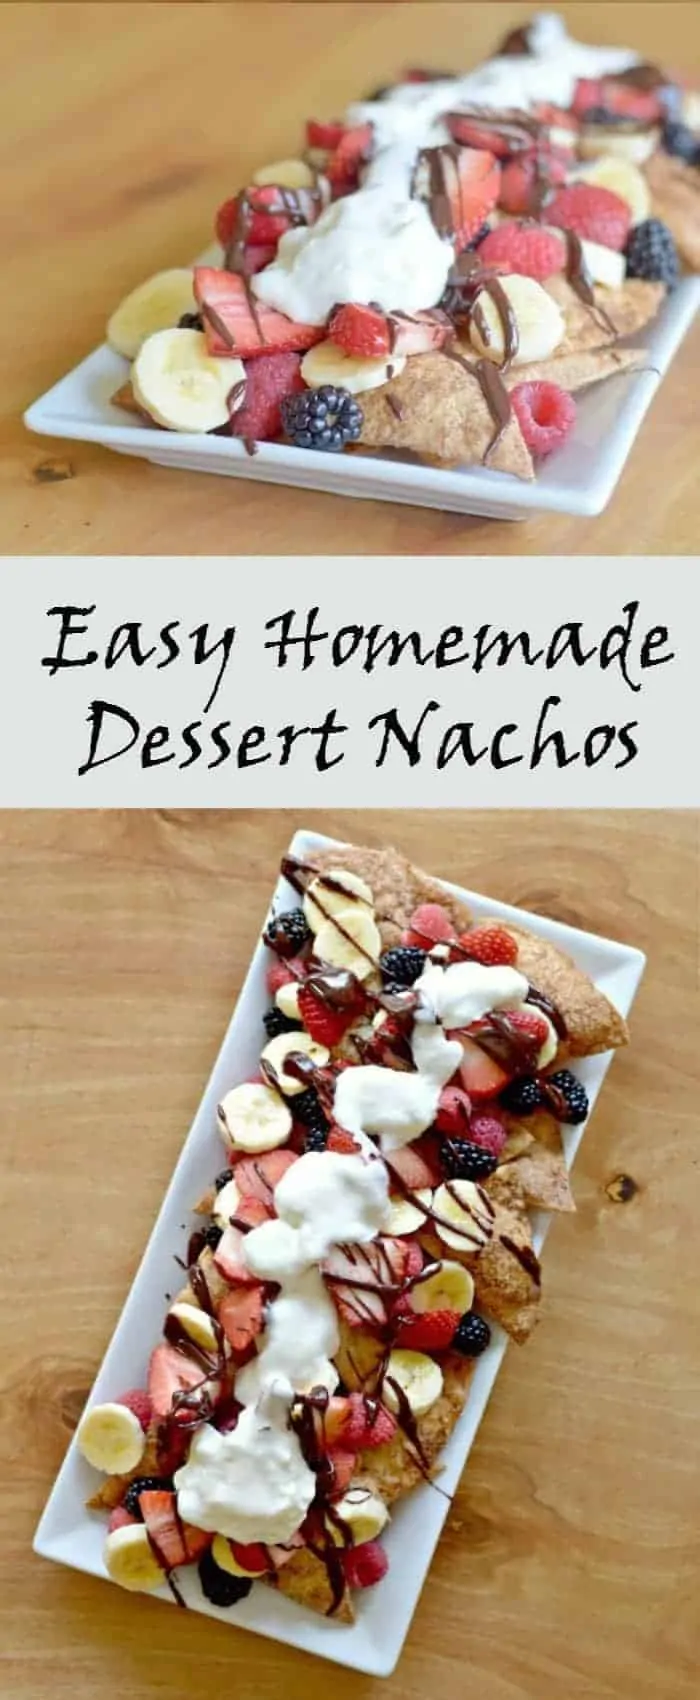 Easy homemade dessert nachos recipe with cinnamon sugar tortilla chips Mexican chocolate sauce, and fresh fruit for a lighter and delicious treat. Perfect for a potluck or Cinco de Mayo.